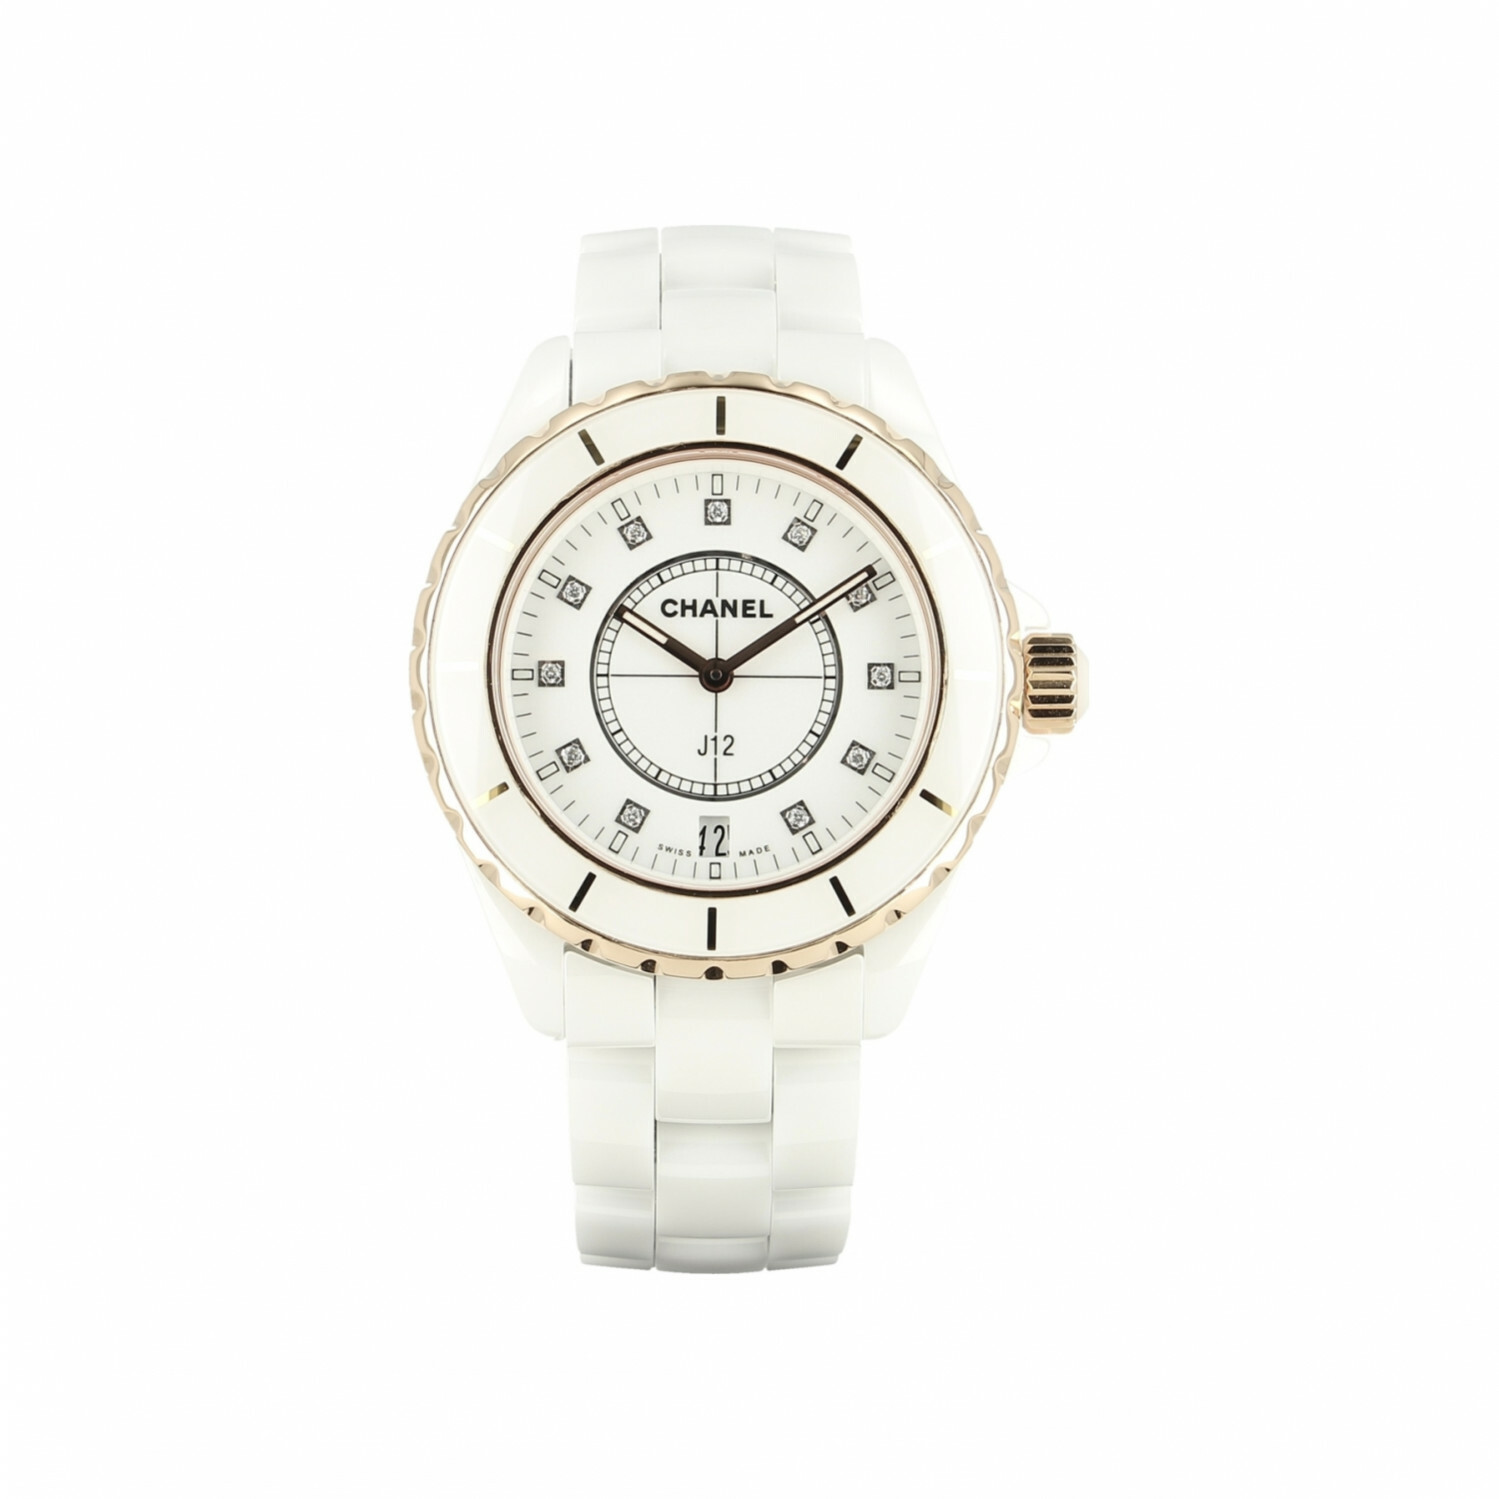 Chanel Announces J12 Moonphase 38MM Watch  Page 2 of 2  aBlogtoWatch